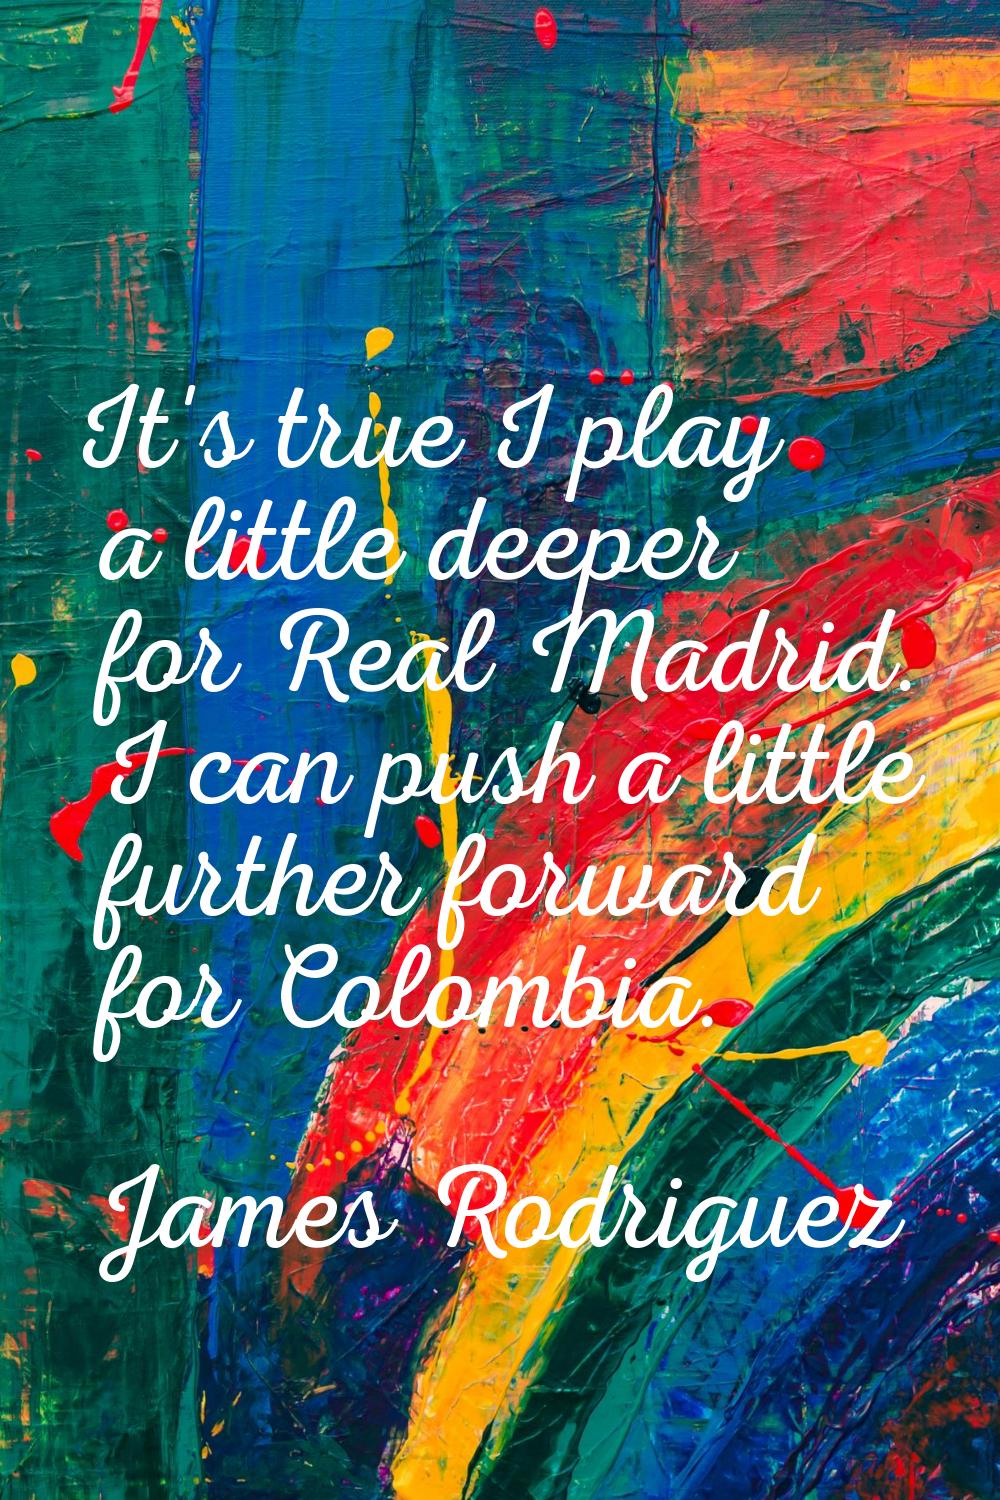 It's true I play a little deeper for Real Madrid. I can push a little further forward for Colombia.